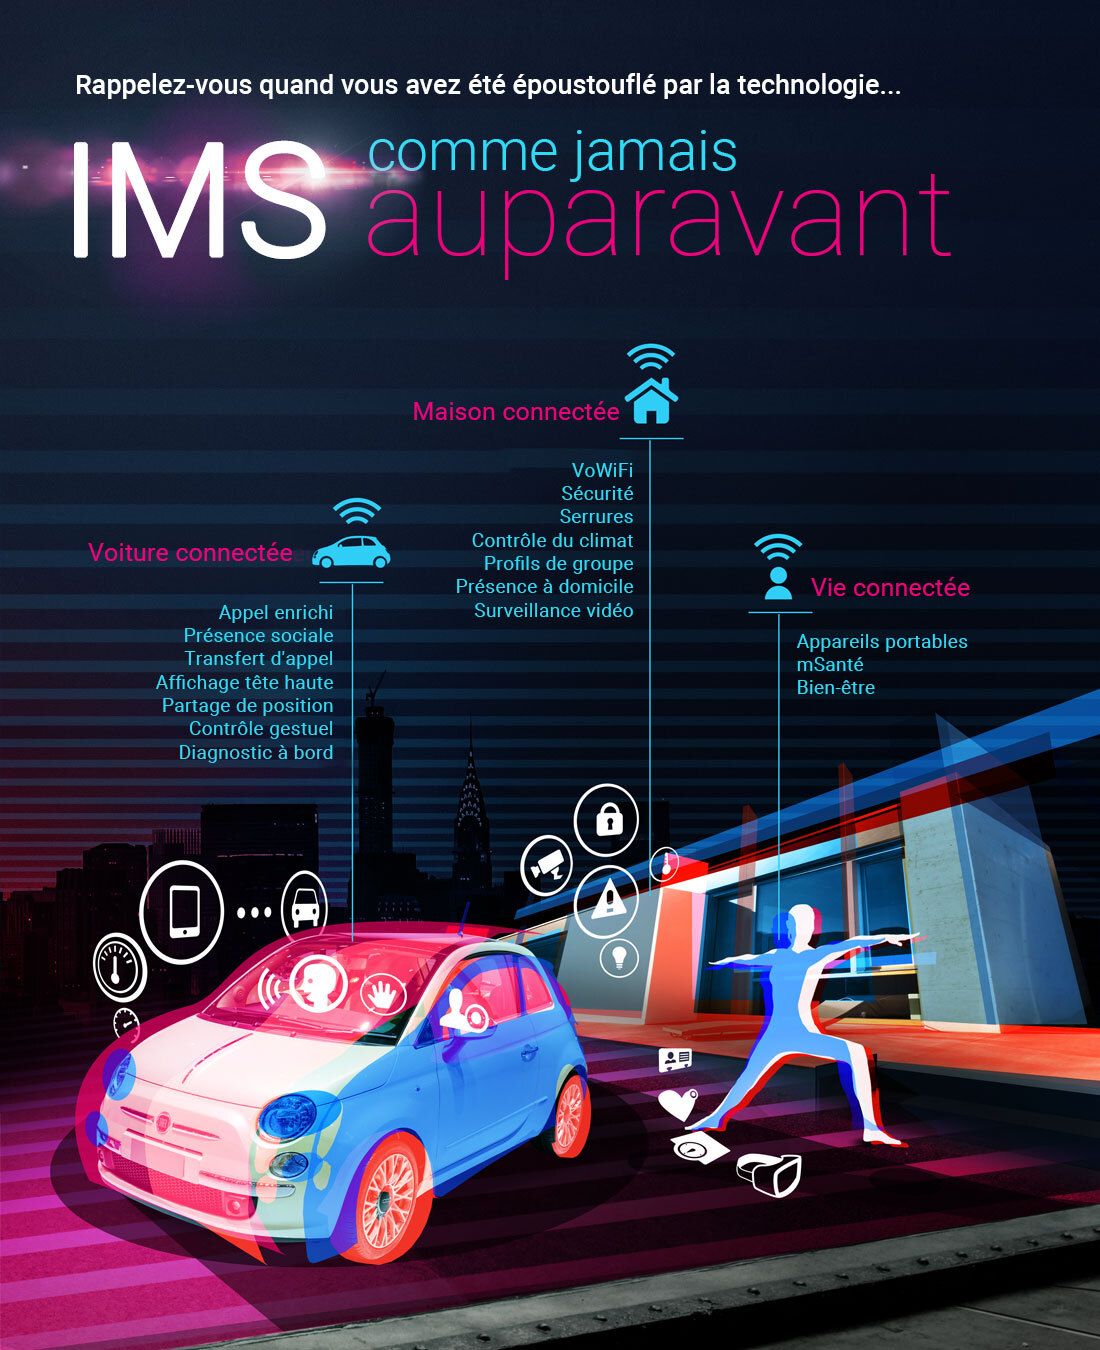 Remember when you were blown away by technology... IMS as never before experienced. Connected Car. Connected Home. Connected Living.